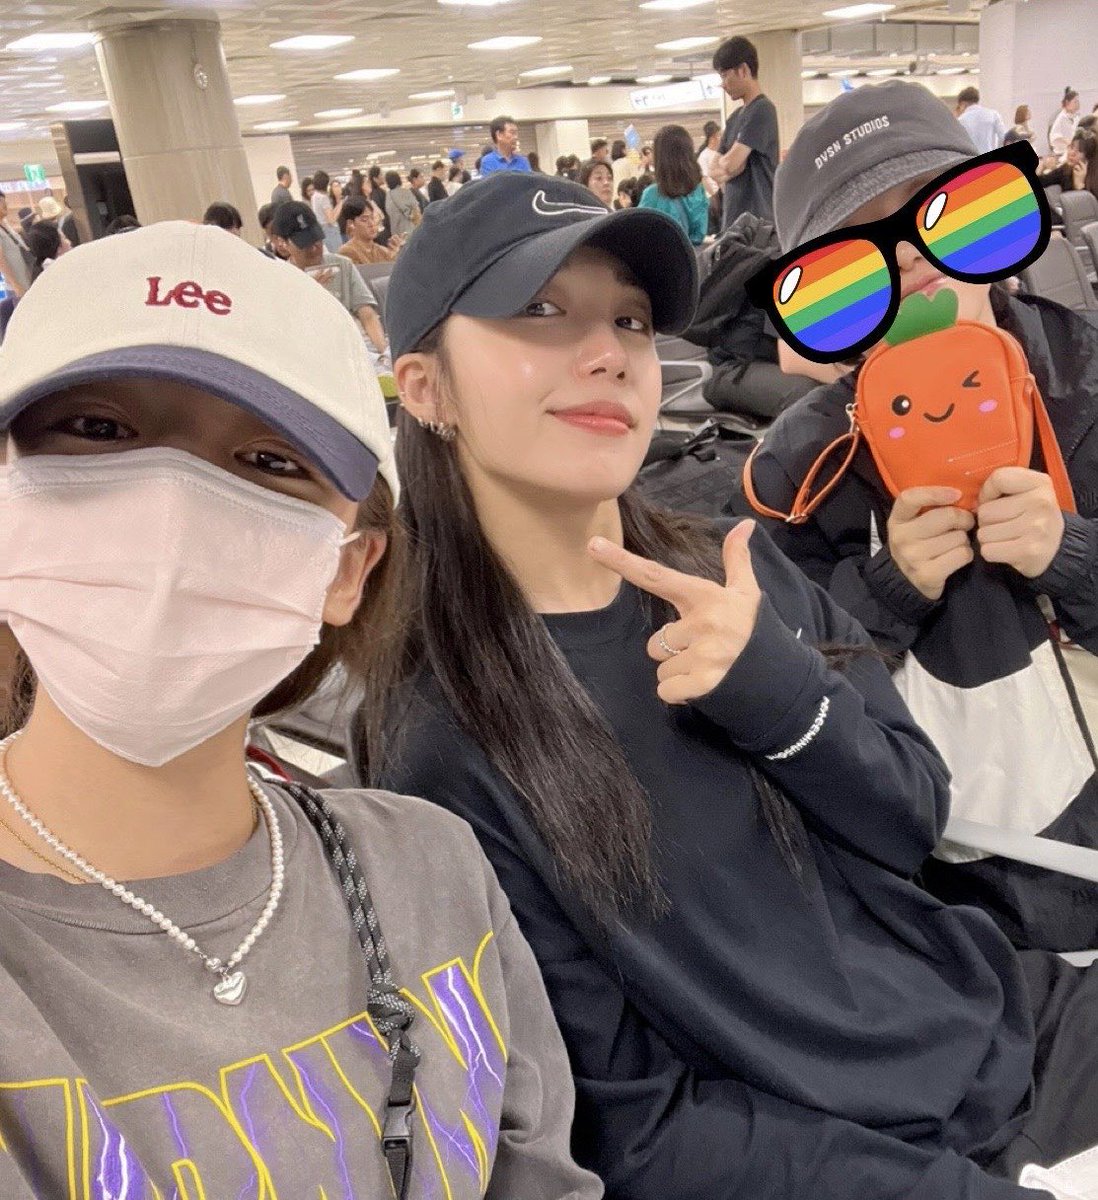 hayoung and naeun bumping into each other on the streets and namjoo and eunji bumping into each other at the airport lmfao even the universe wants them together